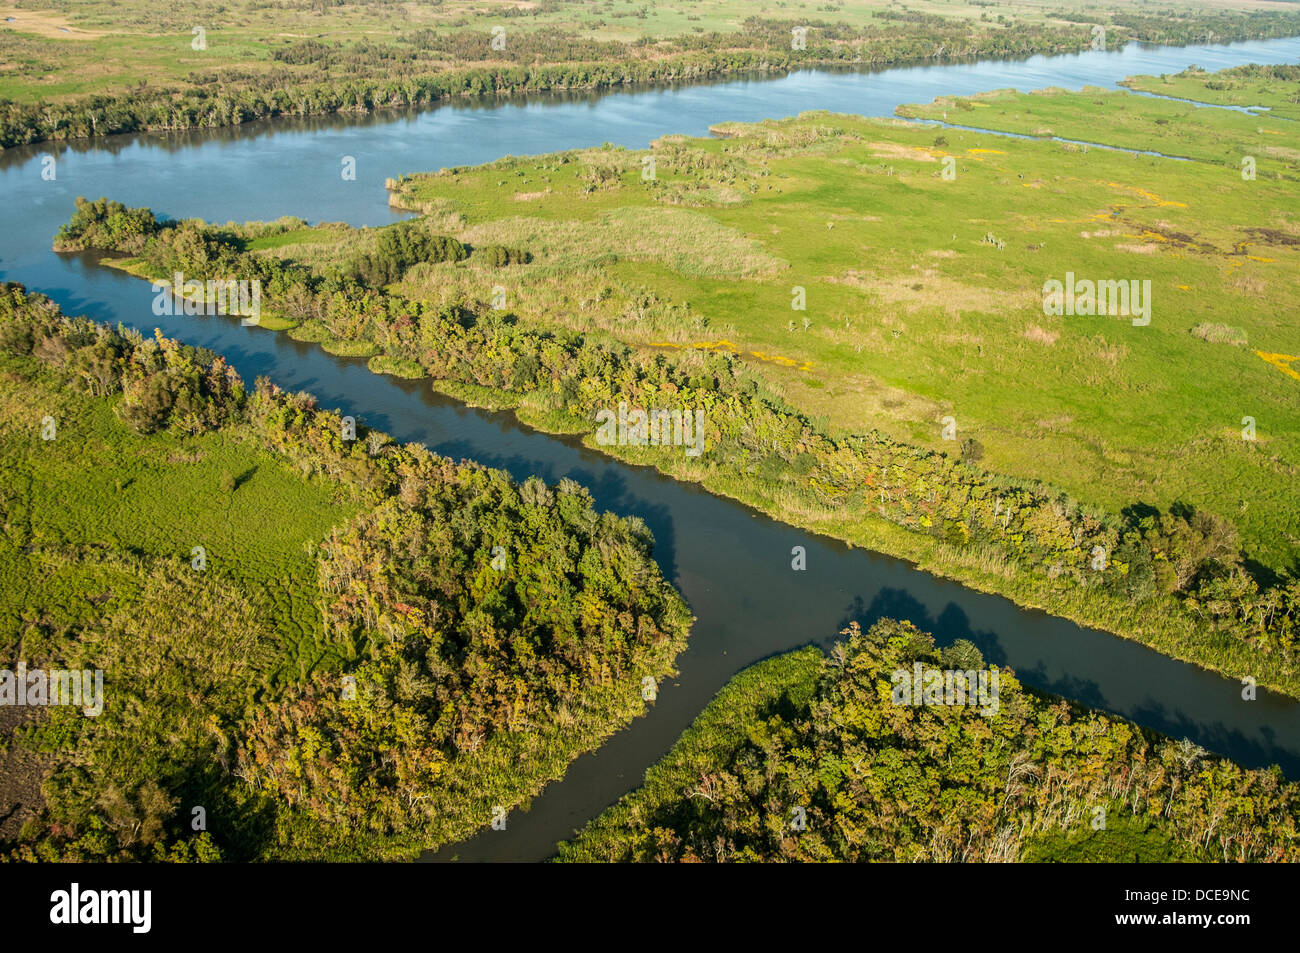 USA, Louisiana, Atchafalaya Basin, man-made channels which provide access to oil drilling sites but disrupt flow of the basin. Stock Photo